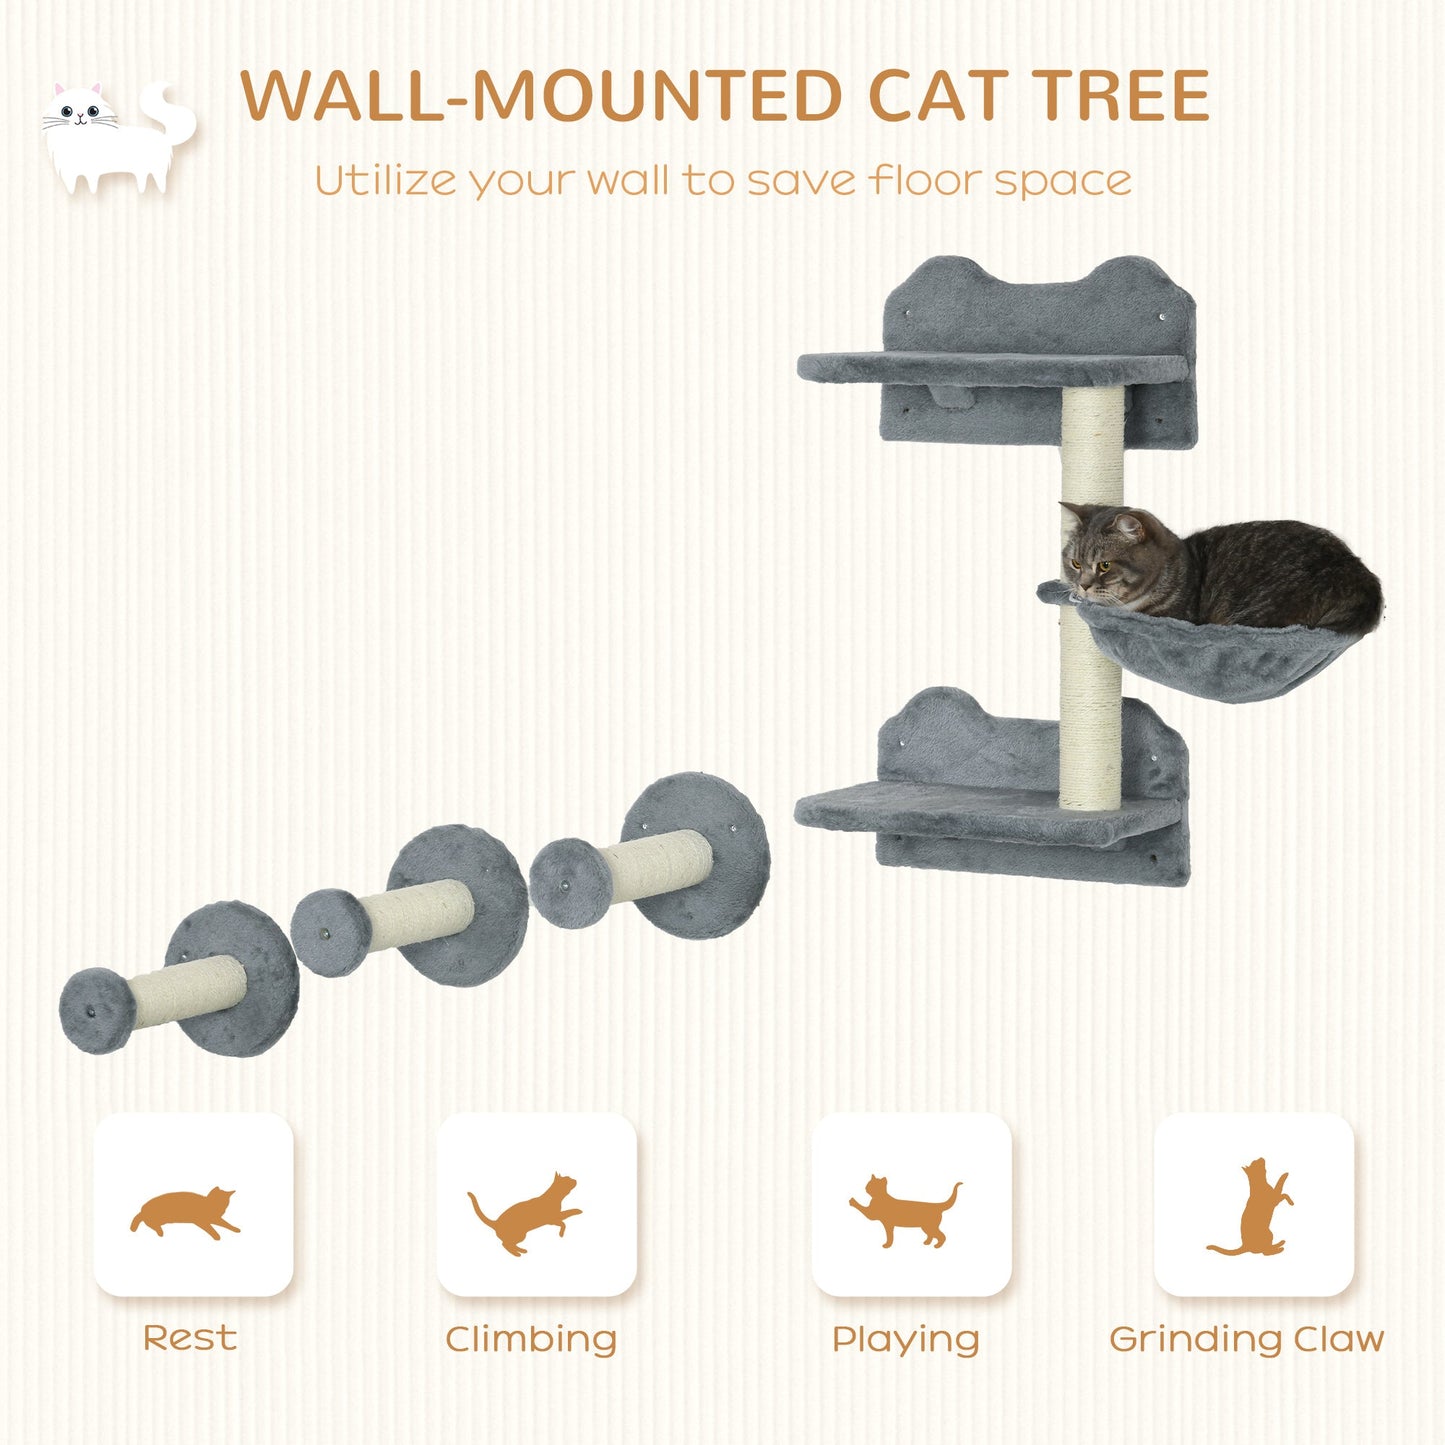 4Pcs Cat Wall Shelf with Scratching Posts, Hammock, Setps, Platforms, Cat Shelves for Relaxing, Sleeping, Jumping, Cat Wall Climber for Indoor Cats, Grey at Gallery Canada